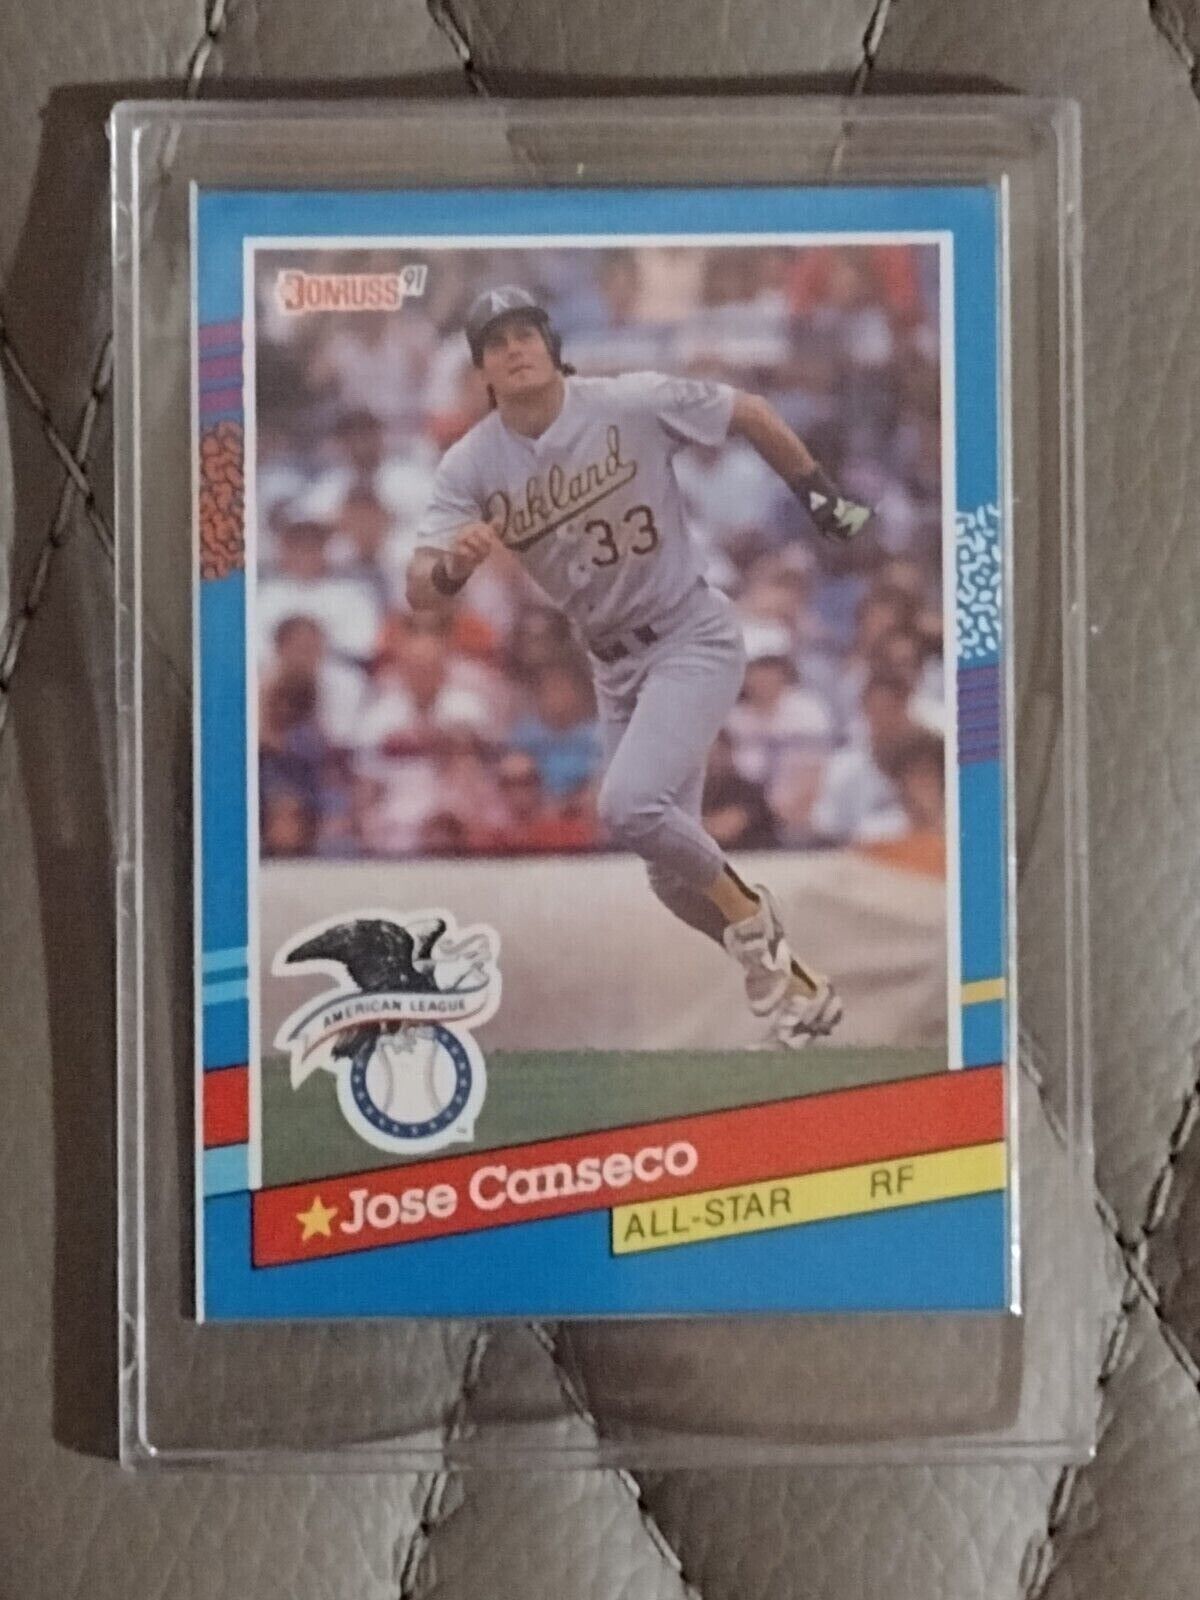 Baseball Card Show Purchase #9 – Jose Canseco 1986 Topps Traded